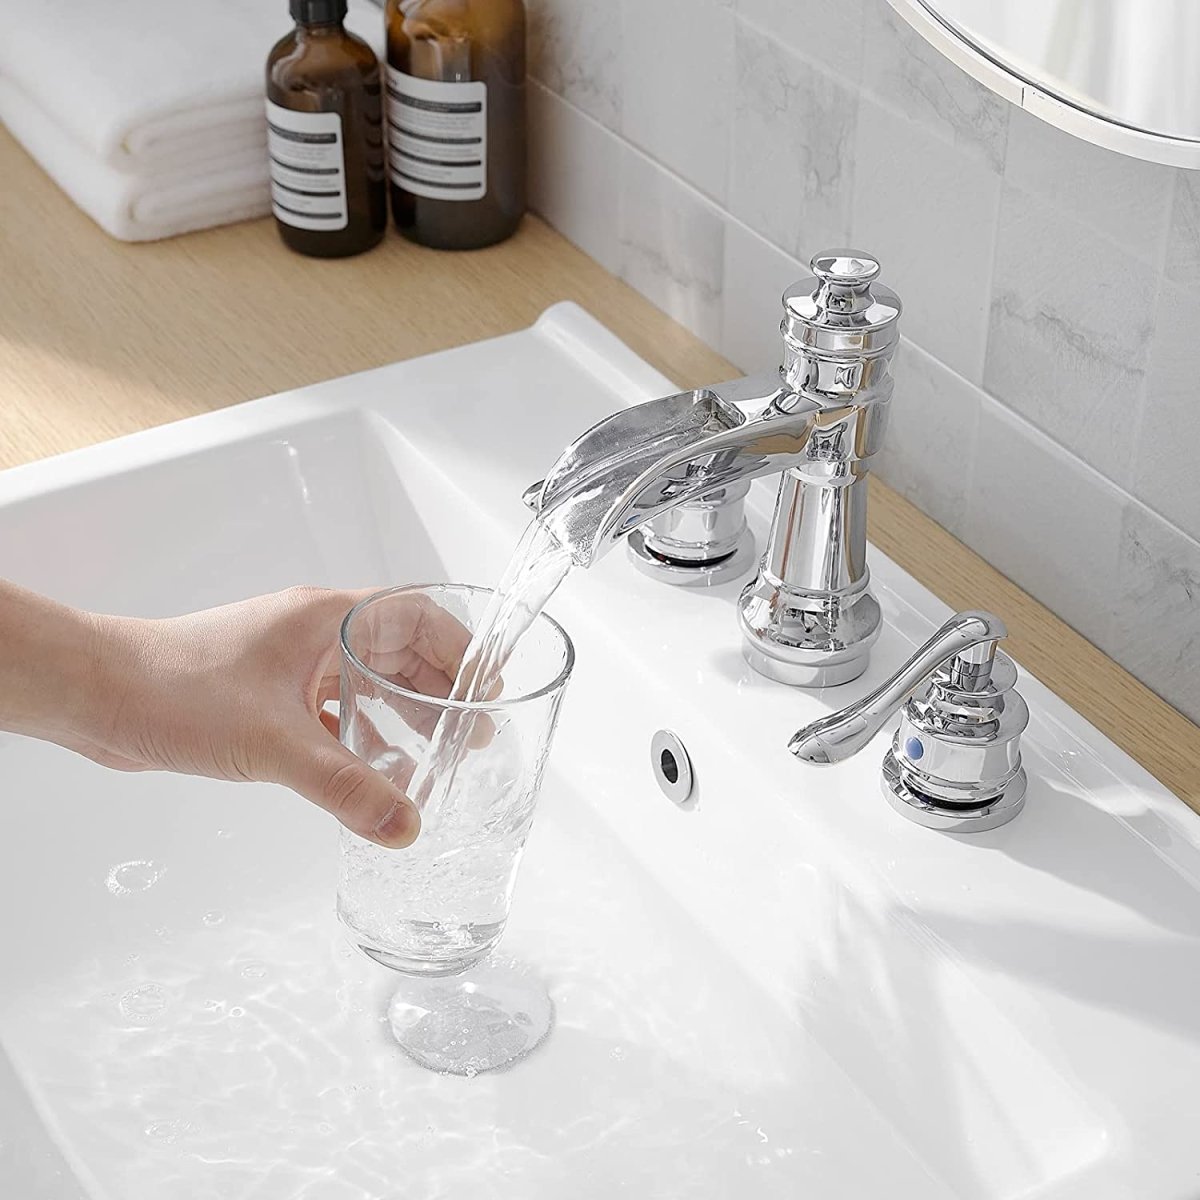 8 in Waterfall 2-Handle Bathroom Faucet Polished Chrome - buyfaucet.com